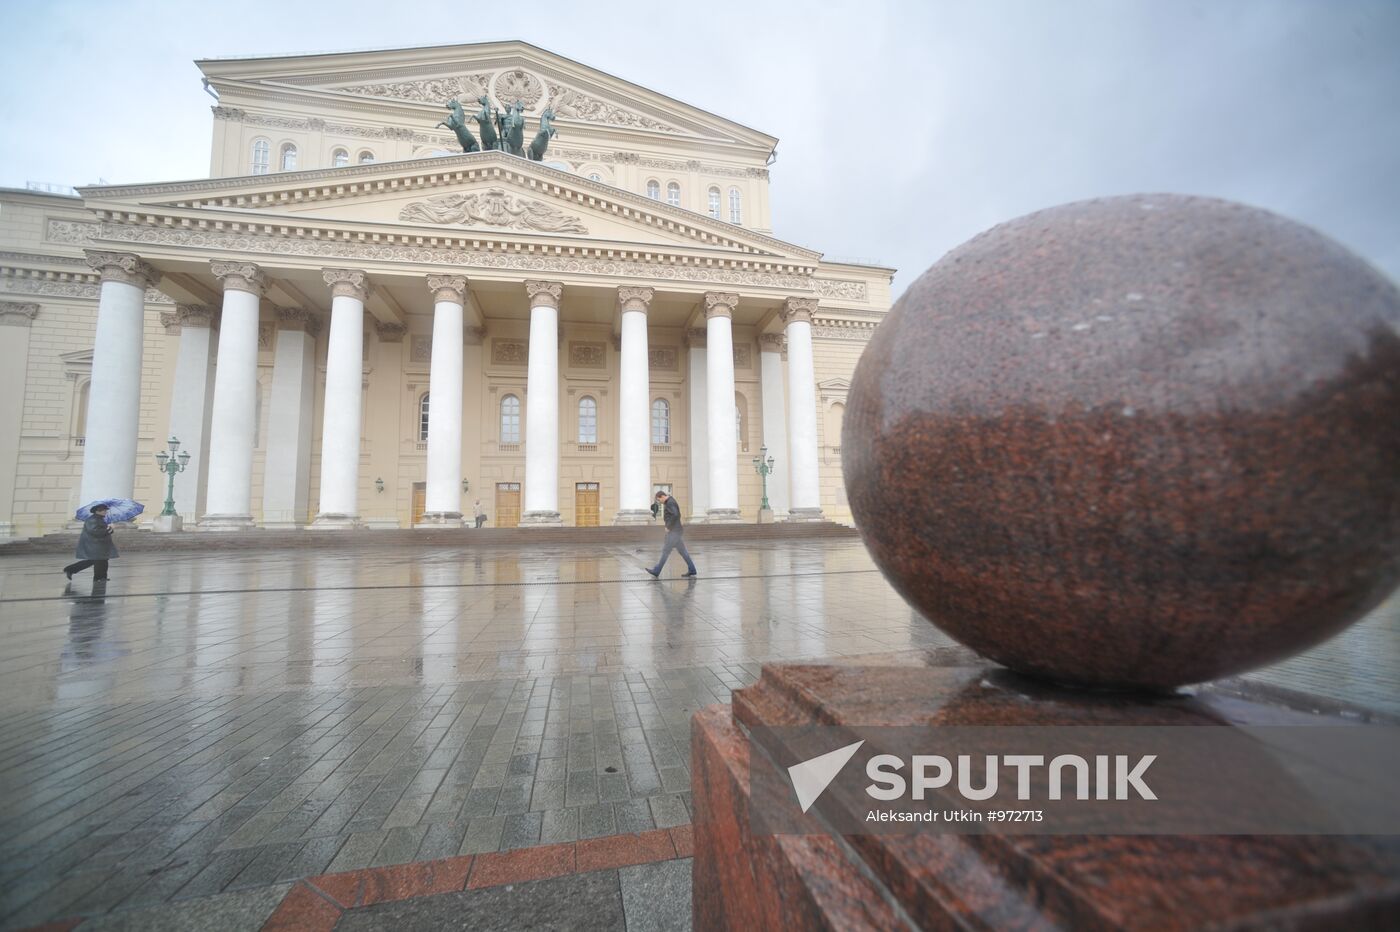 Moscow's Bolshoi Theater after reconstruction